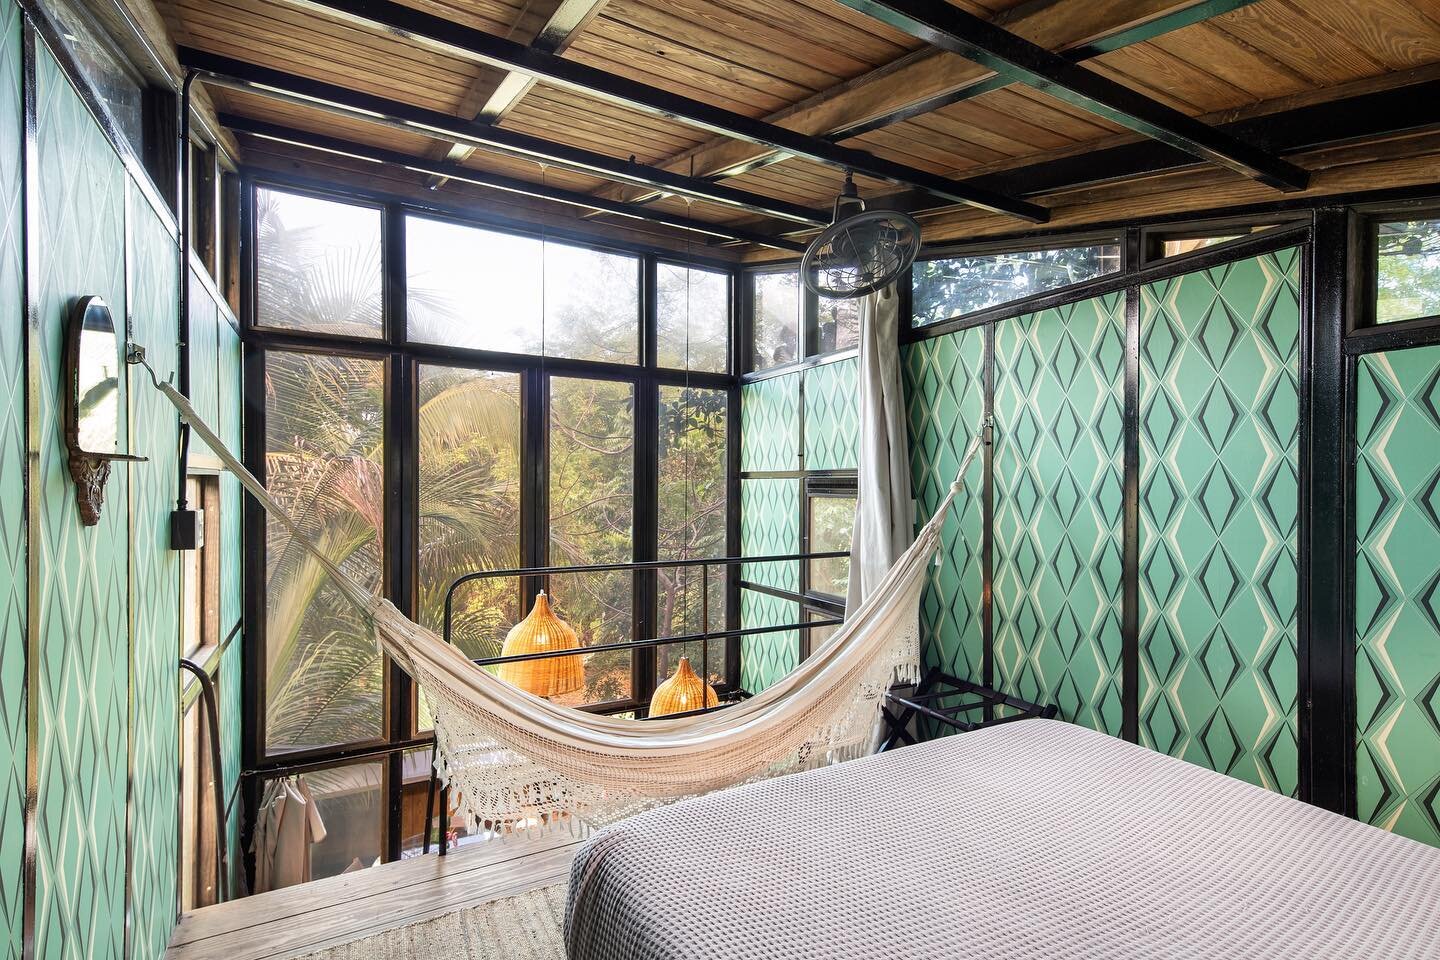 Unveil the magic of Casa Invisible - our discreet oasis within the hotel, intentionally designed to elude the eye. Its black exterior, a masterstroke in subtlety, converges with the lush jungle surroundings through floor-to-ceiling glass doors. Step 